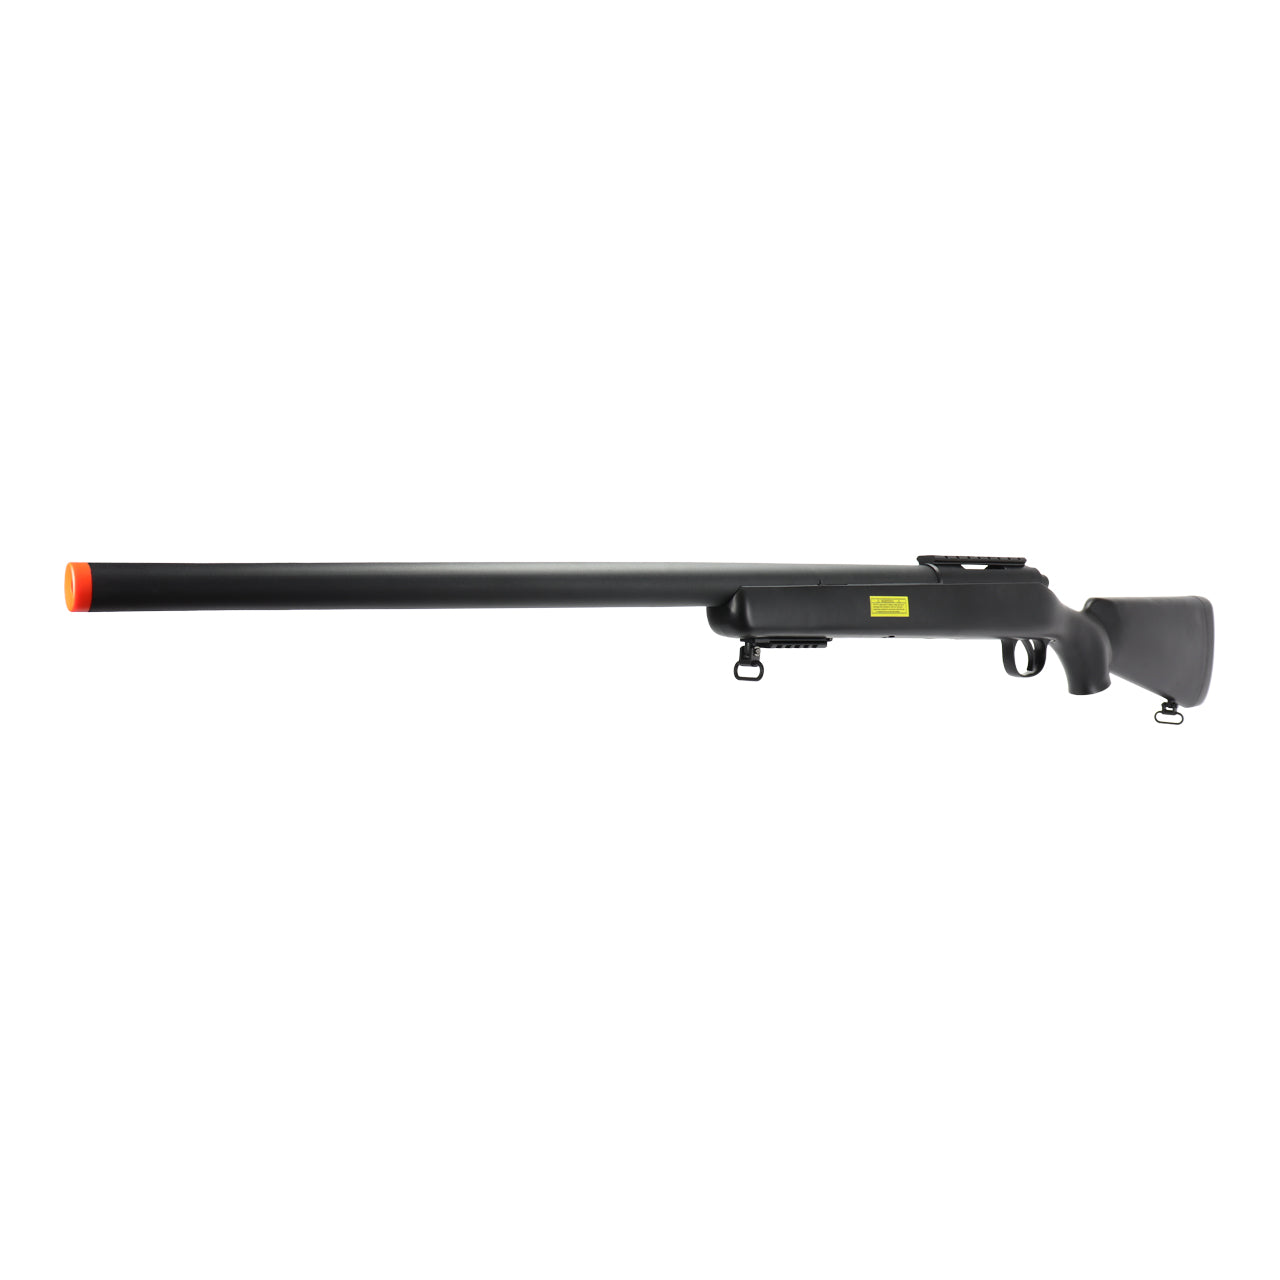 WELL VSR-10 MB03 Bolt Action Airsoft Sniper Rifle